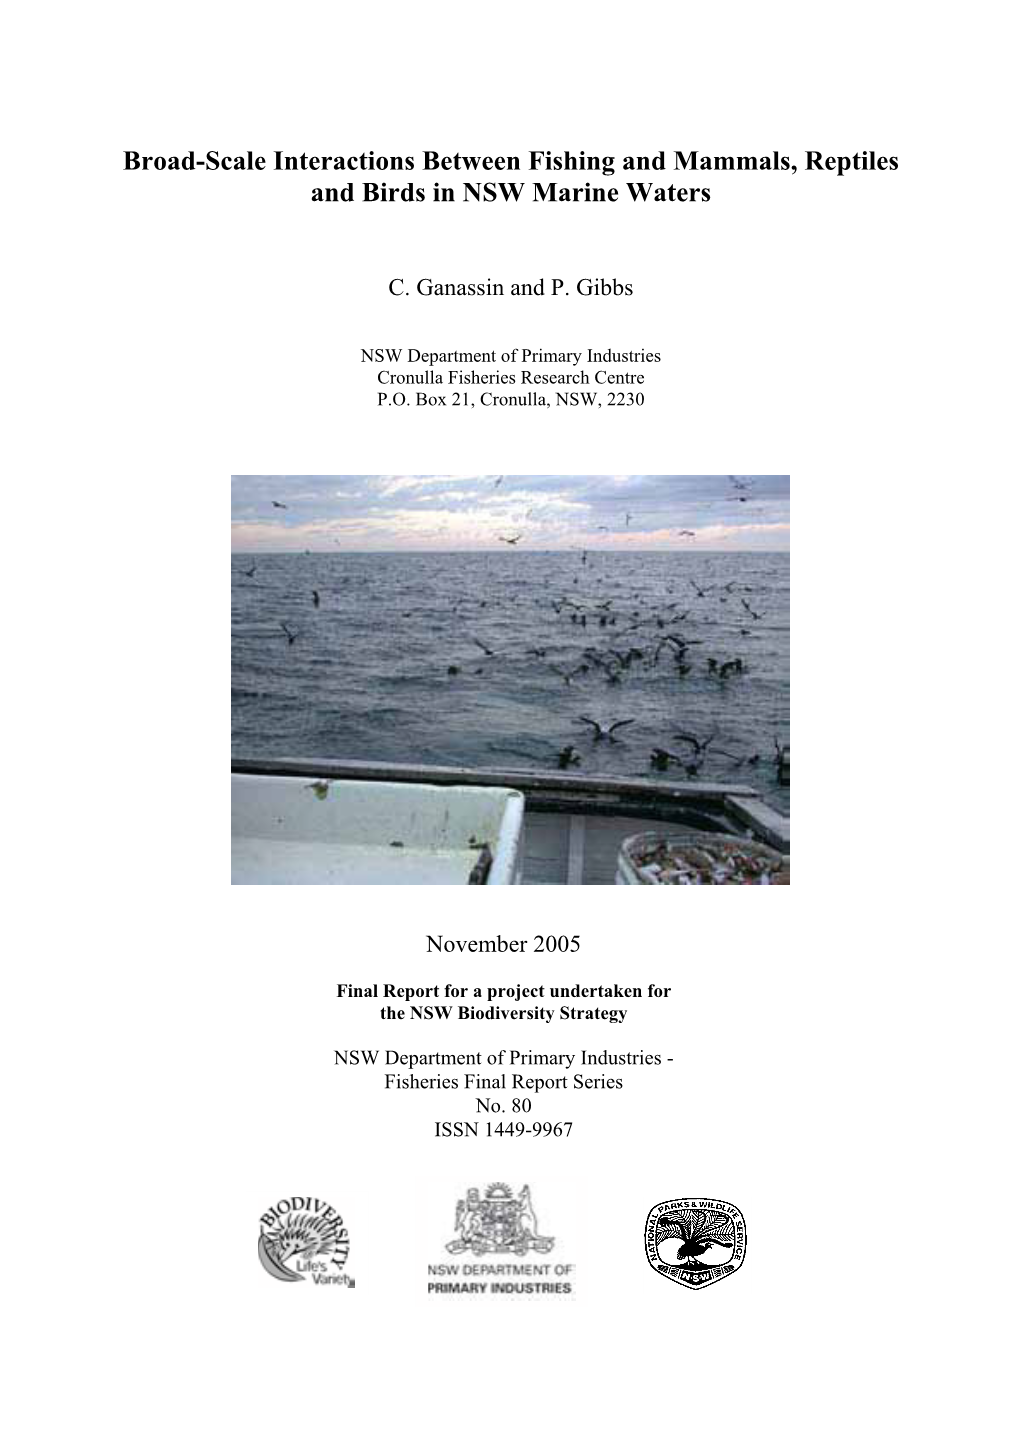 Broad-Scale Interactions Between Fishing and Mammals, Reptiles and Birds in NSW Marine Waters